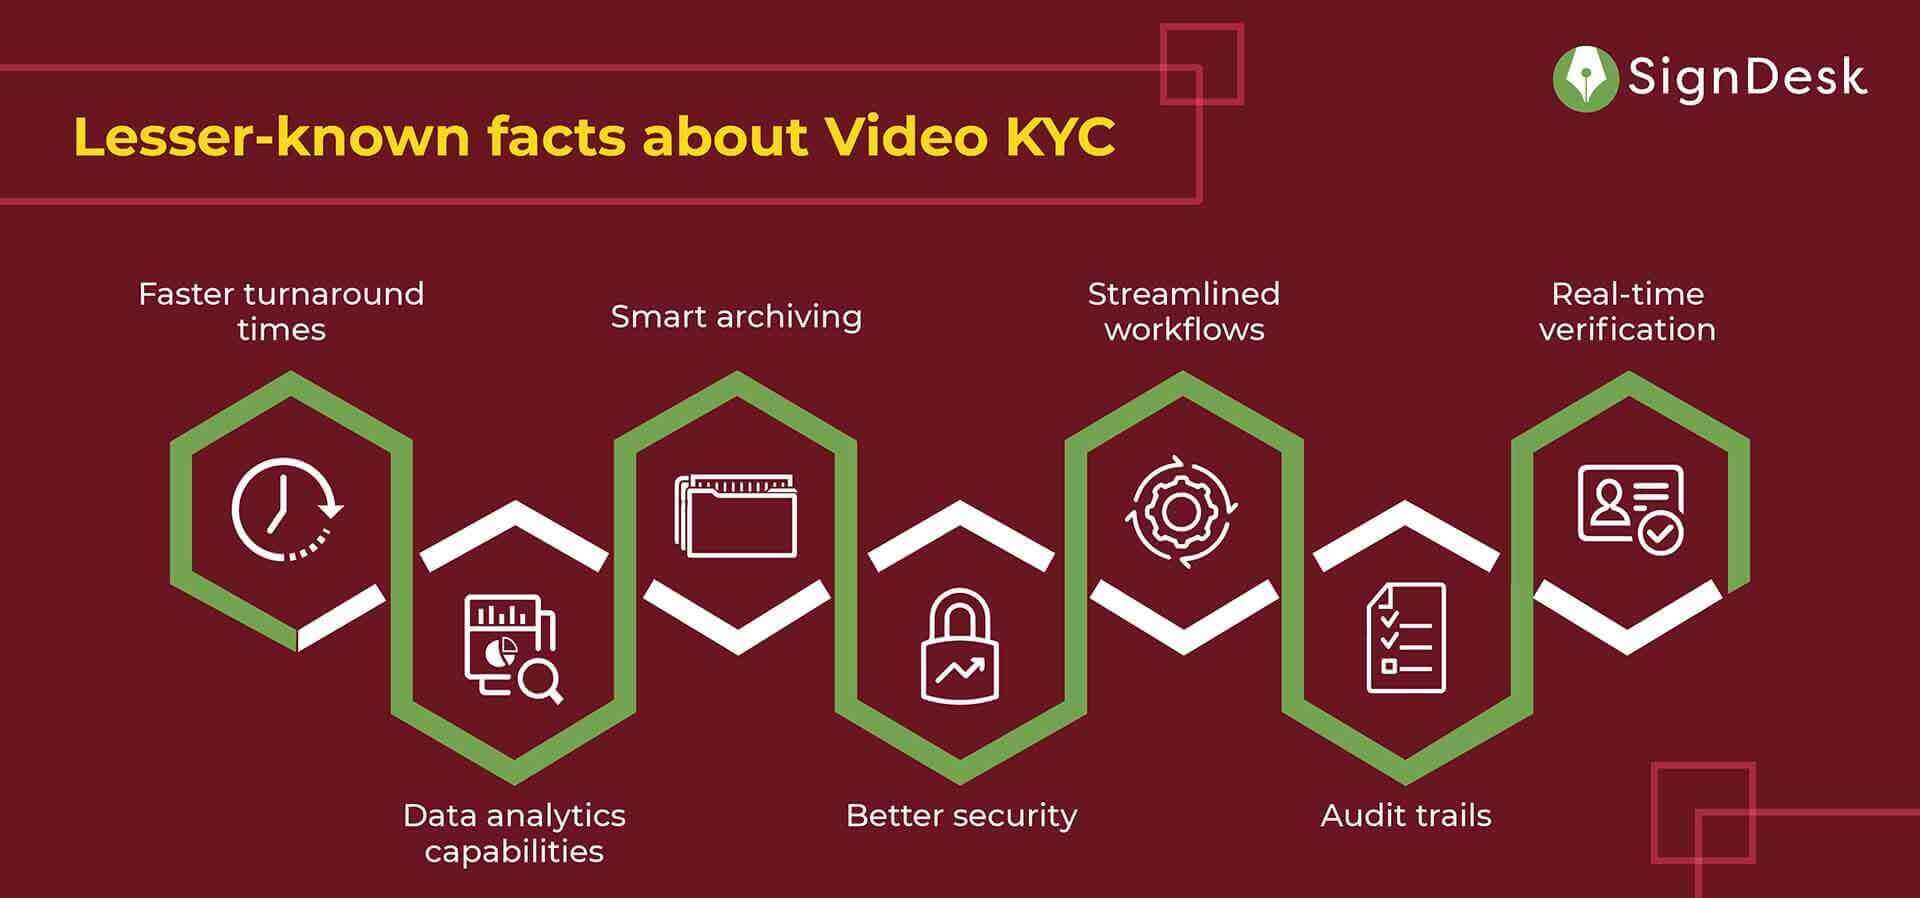 7-interesting-facts-about-Video-KYC 